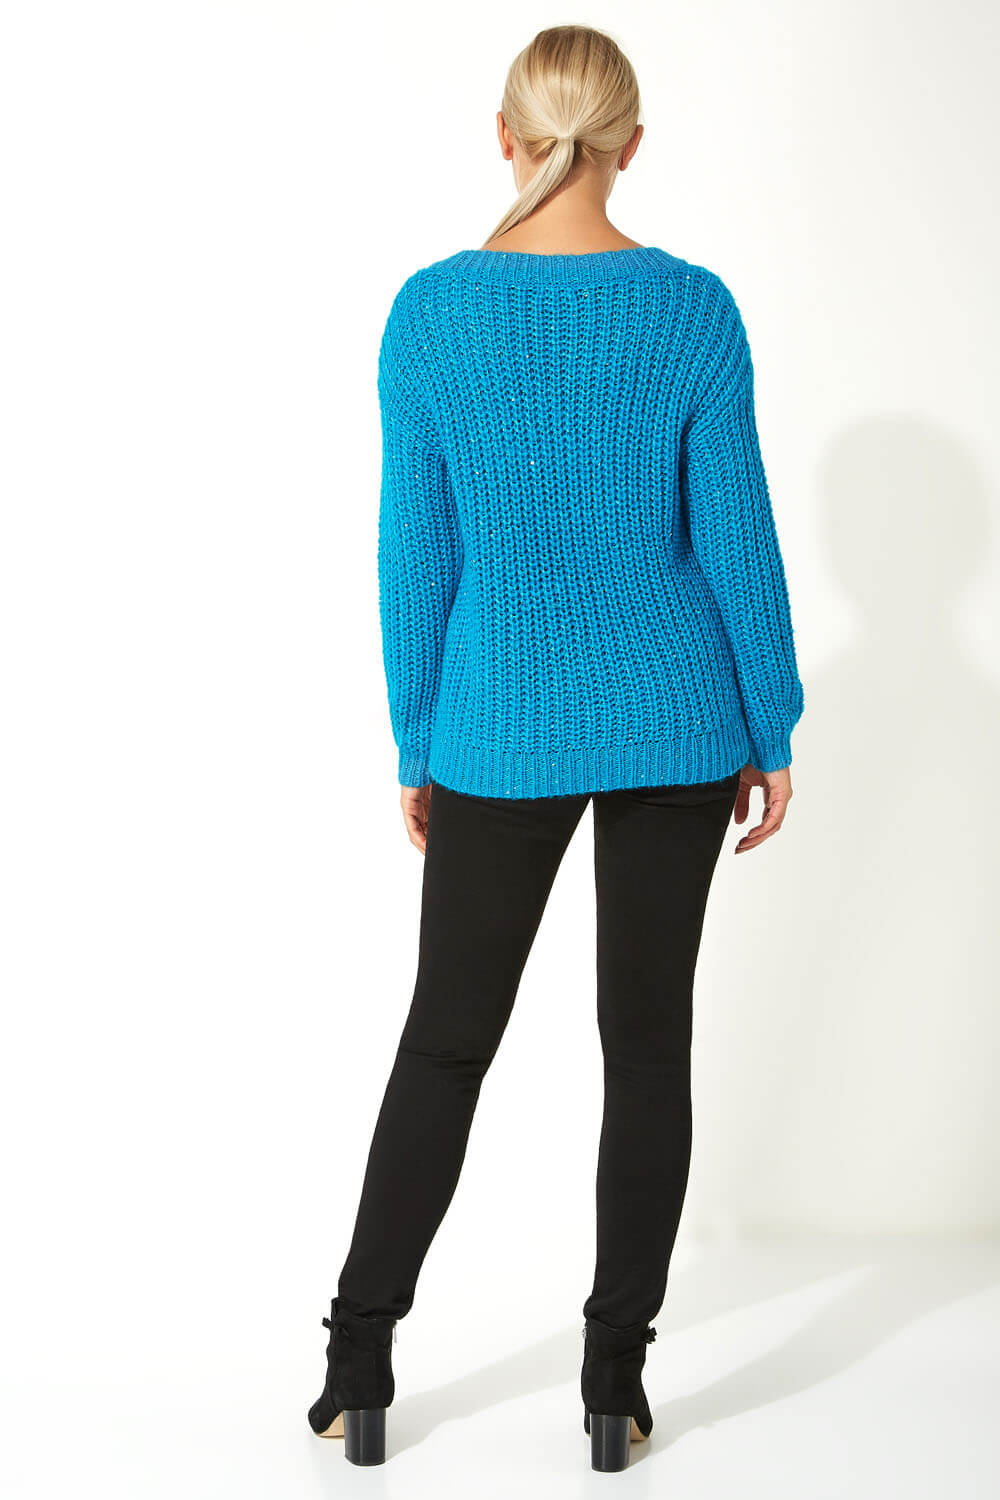 Turquoise Chunky Knit Sequin Jumper , Image 3 of 5